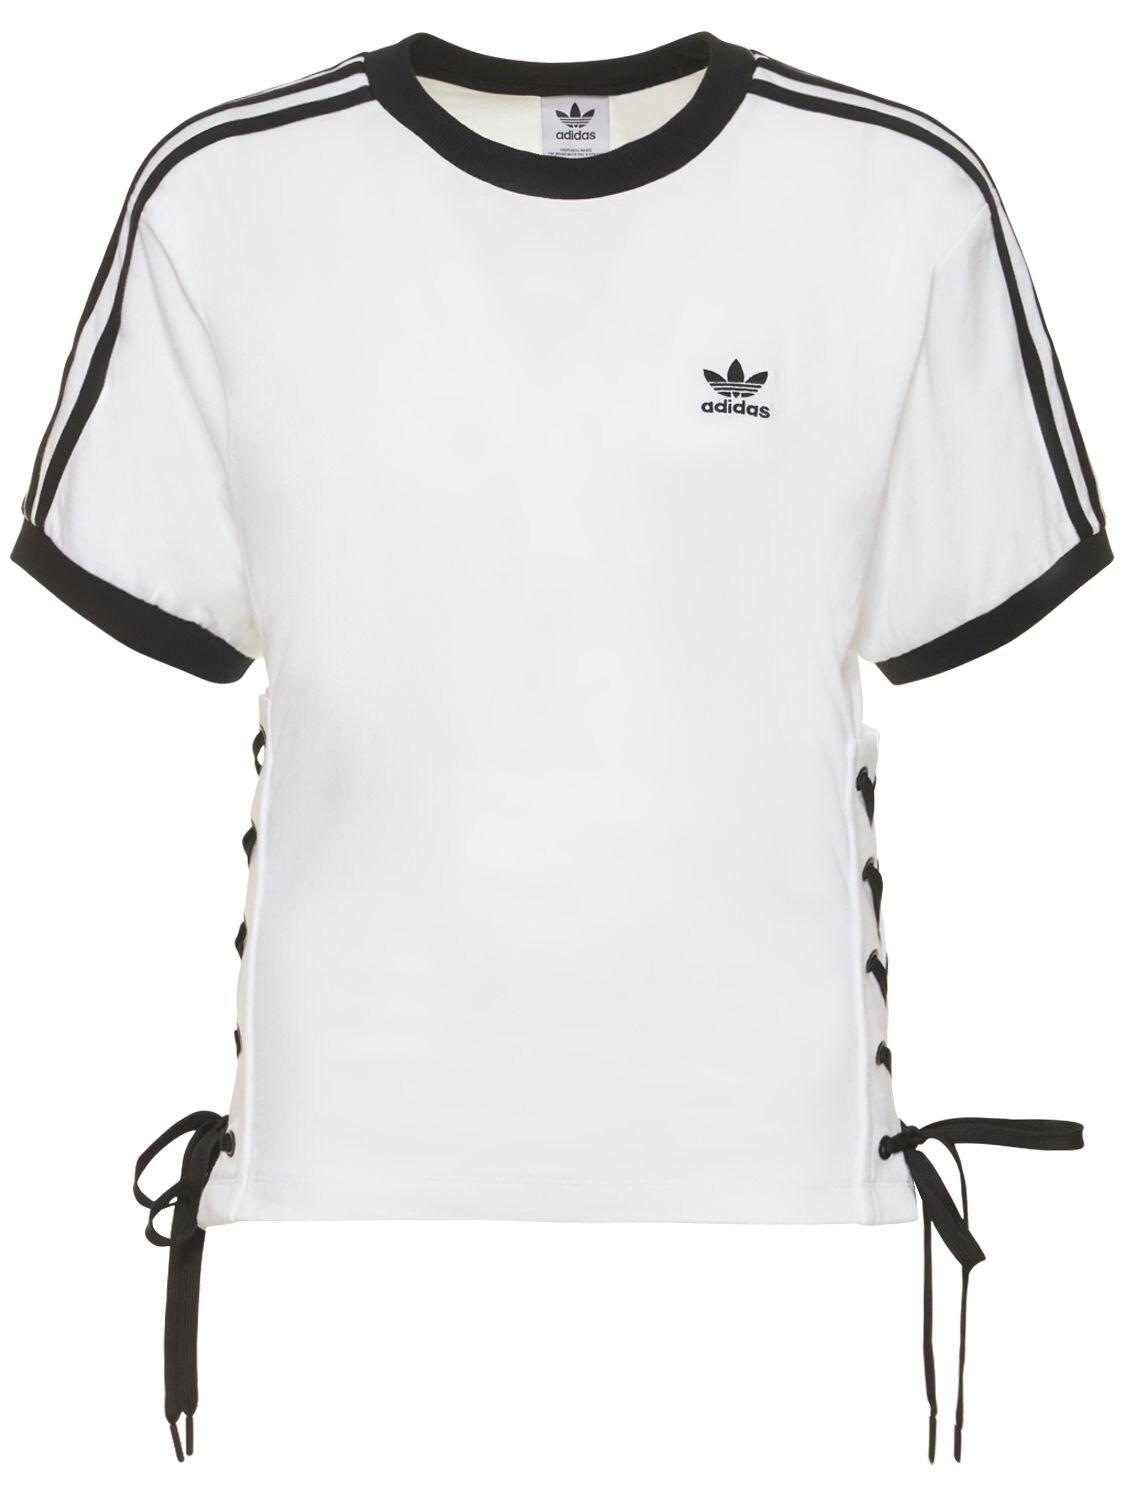 adidas Originals Cotton Lace-up T-shirt in White | Lyst UK